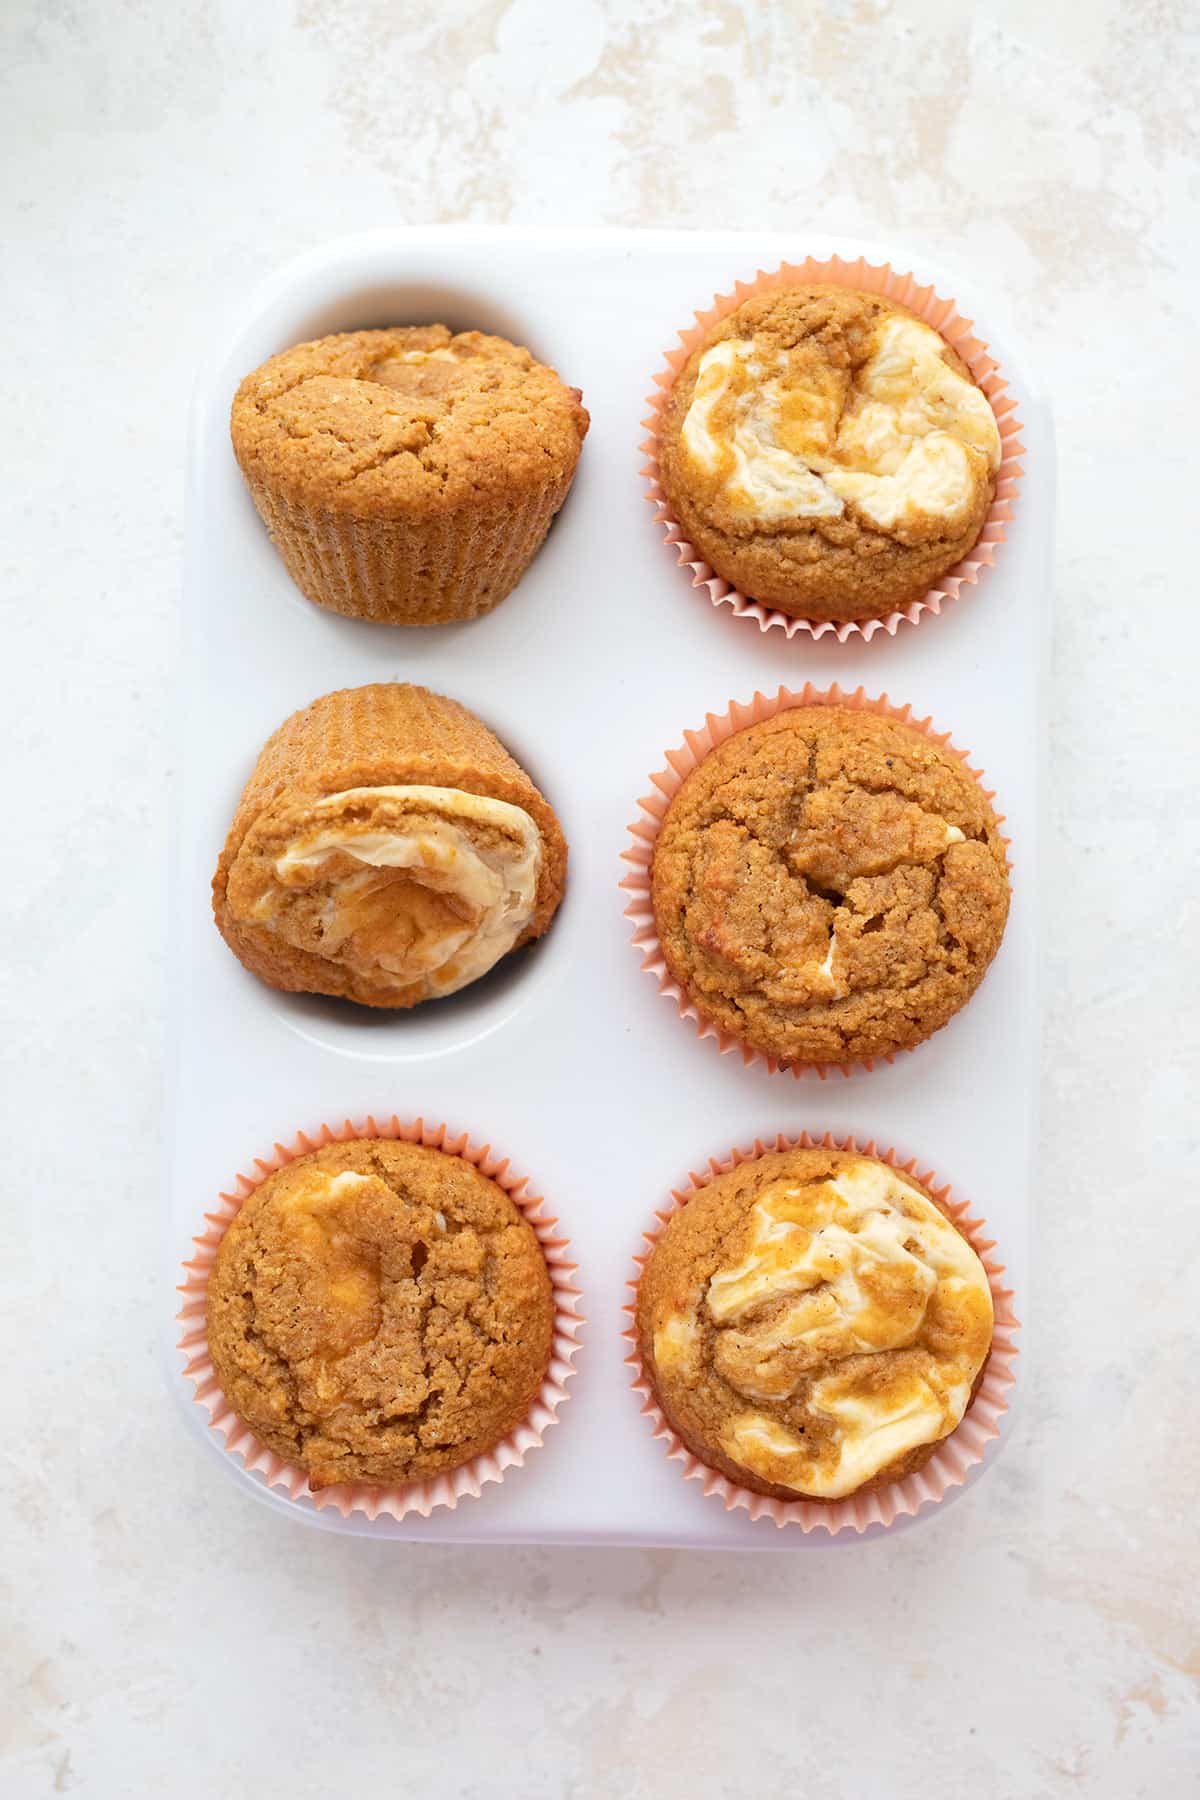 Keto Pumpkin Muffins - with a cheesecake center!